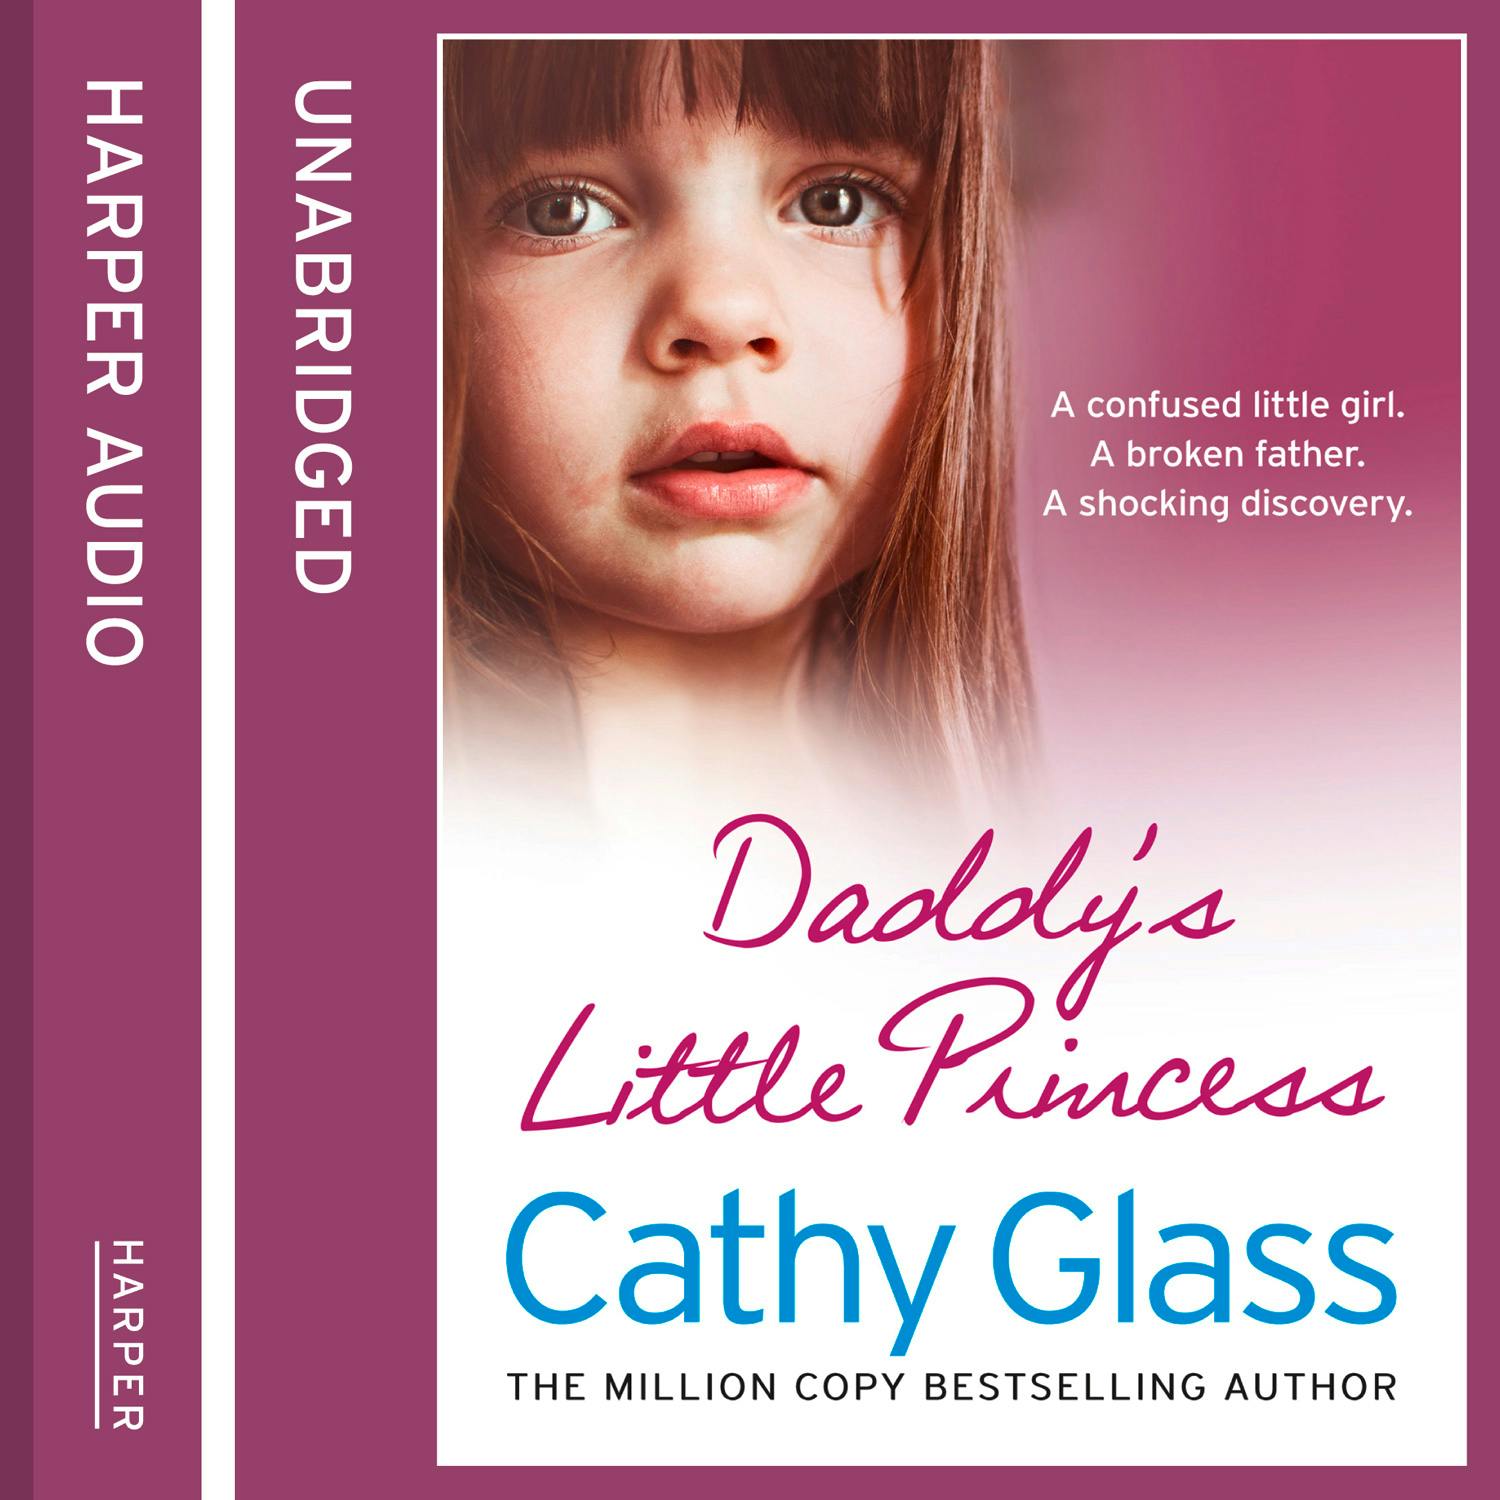 Daddy’s Little Princess - Cathy Glass